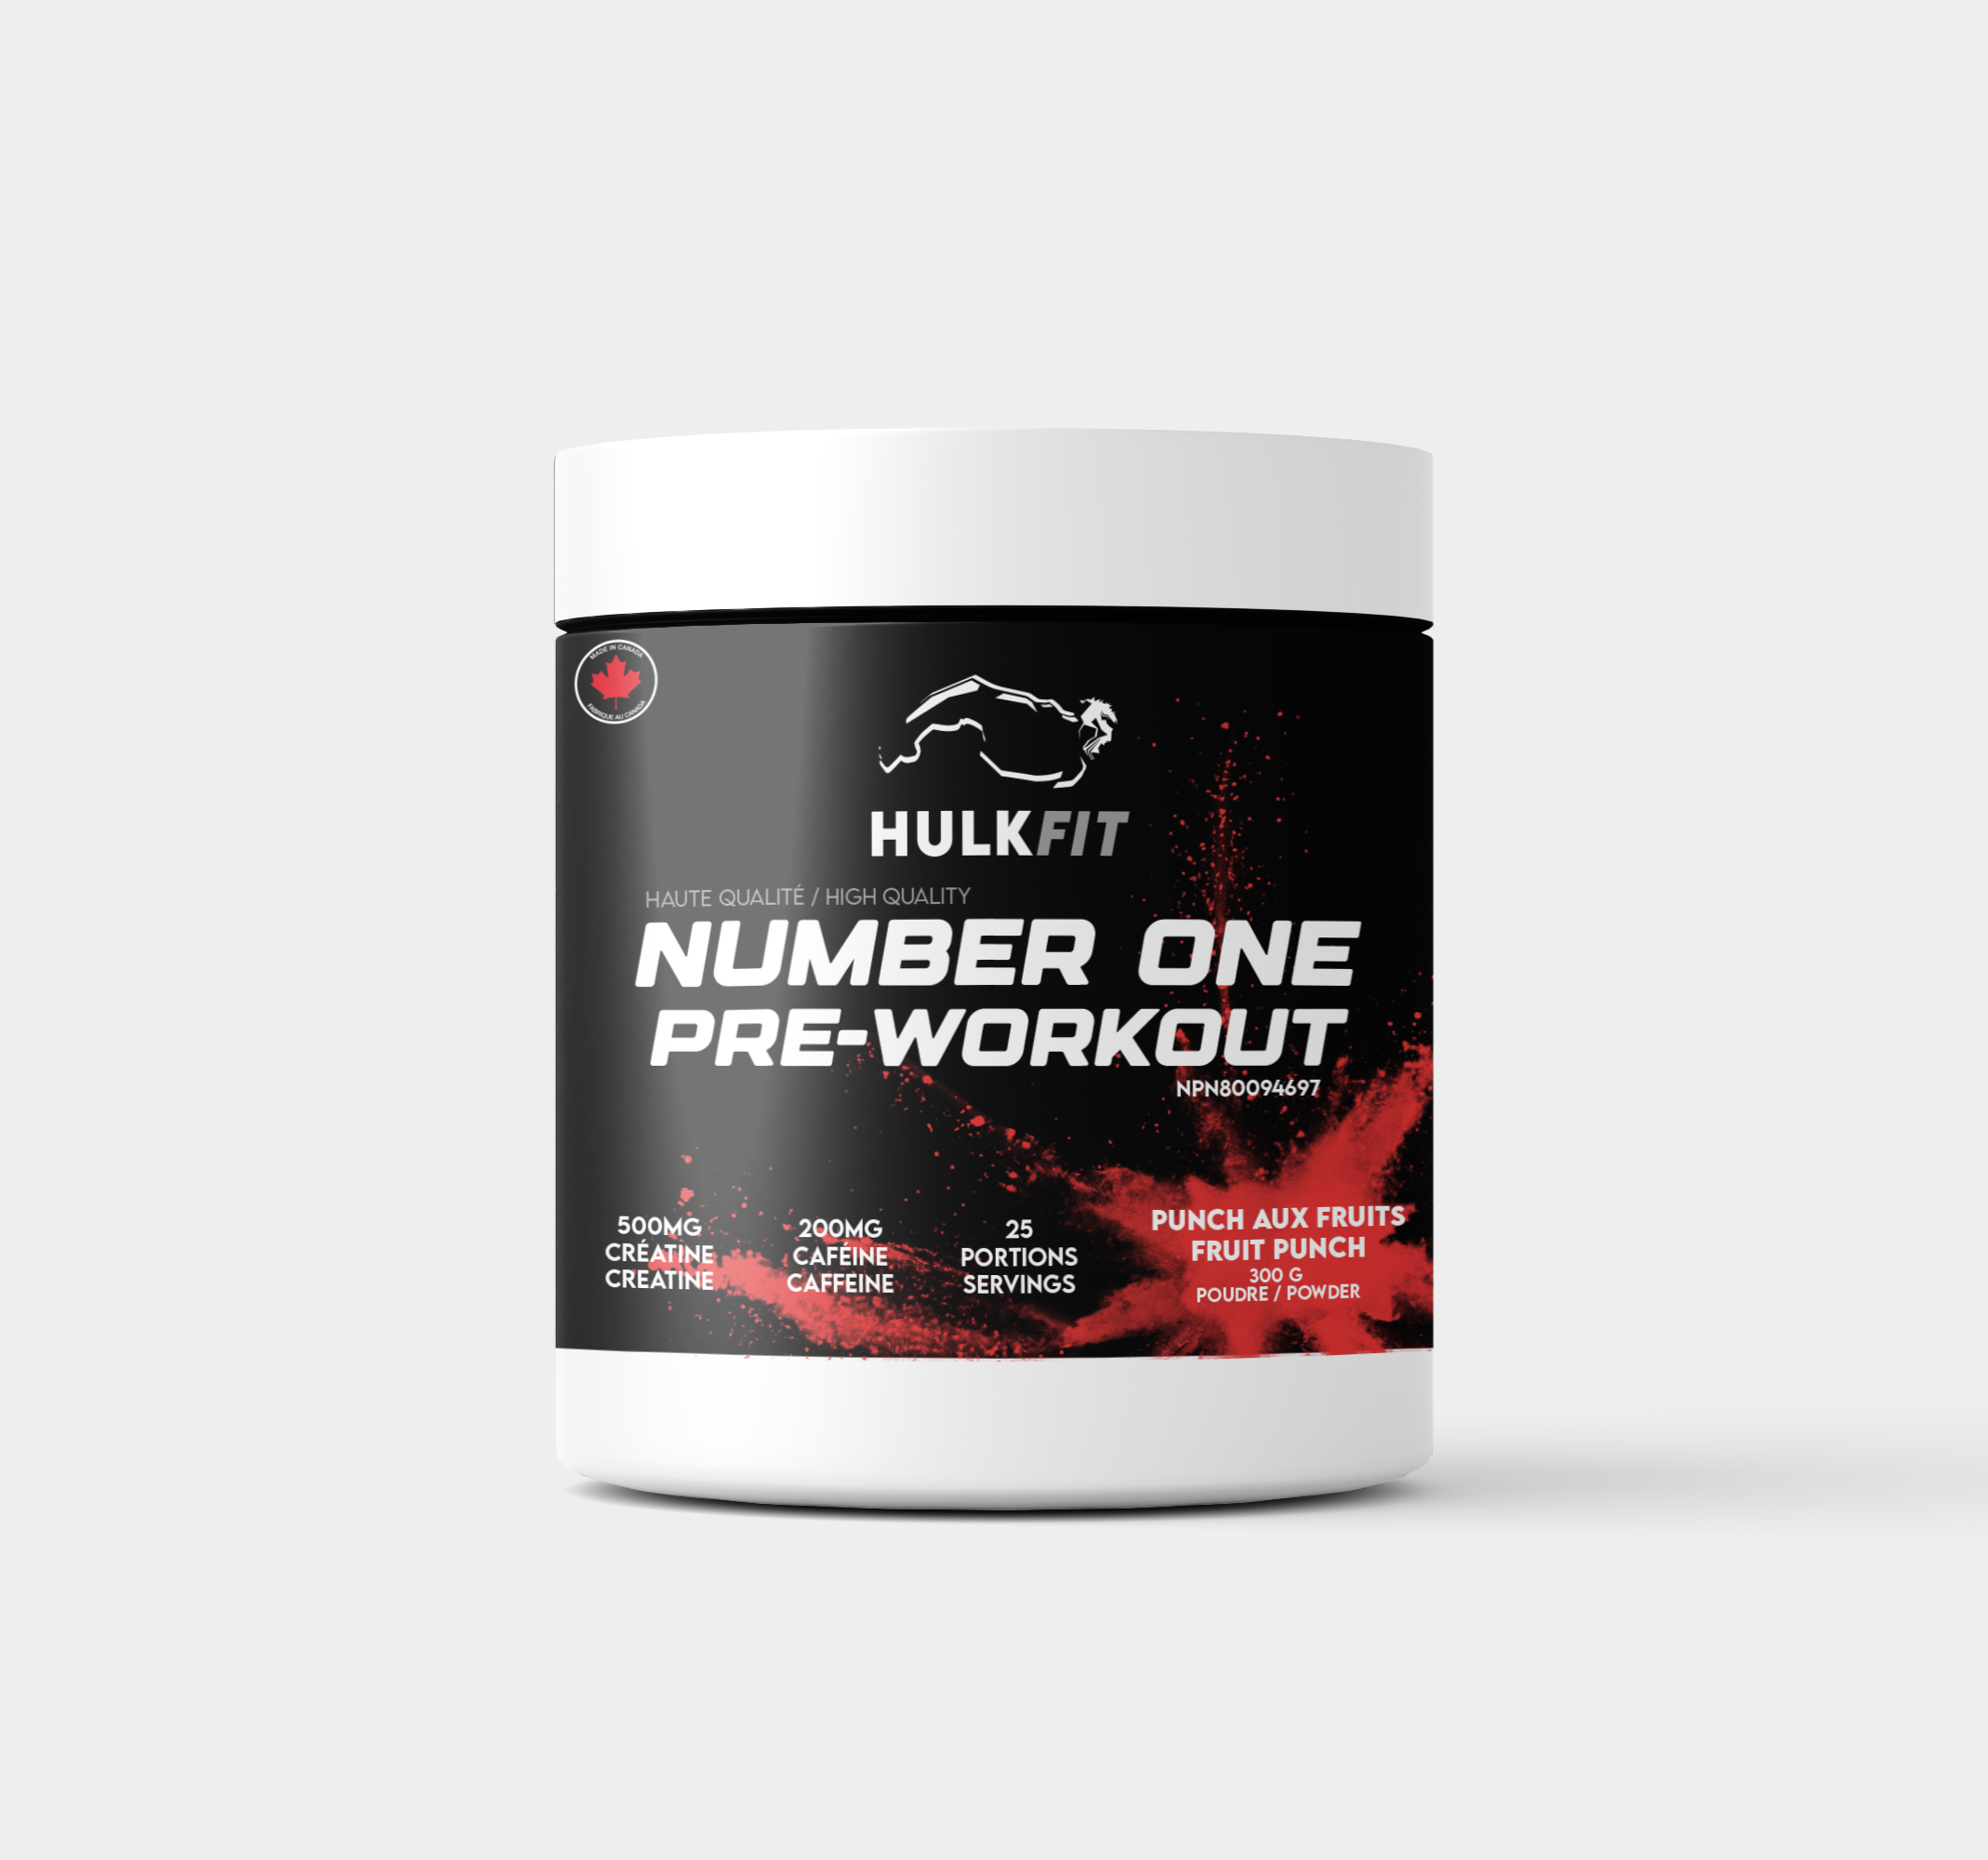 HULKFIT NUMBER ONE PRE-WORKOUT (300G)